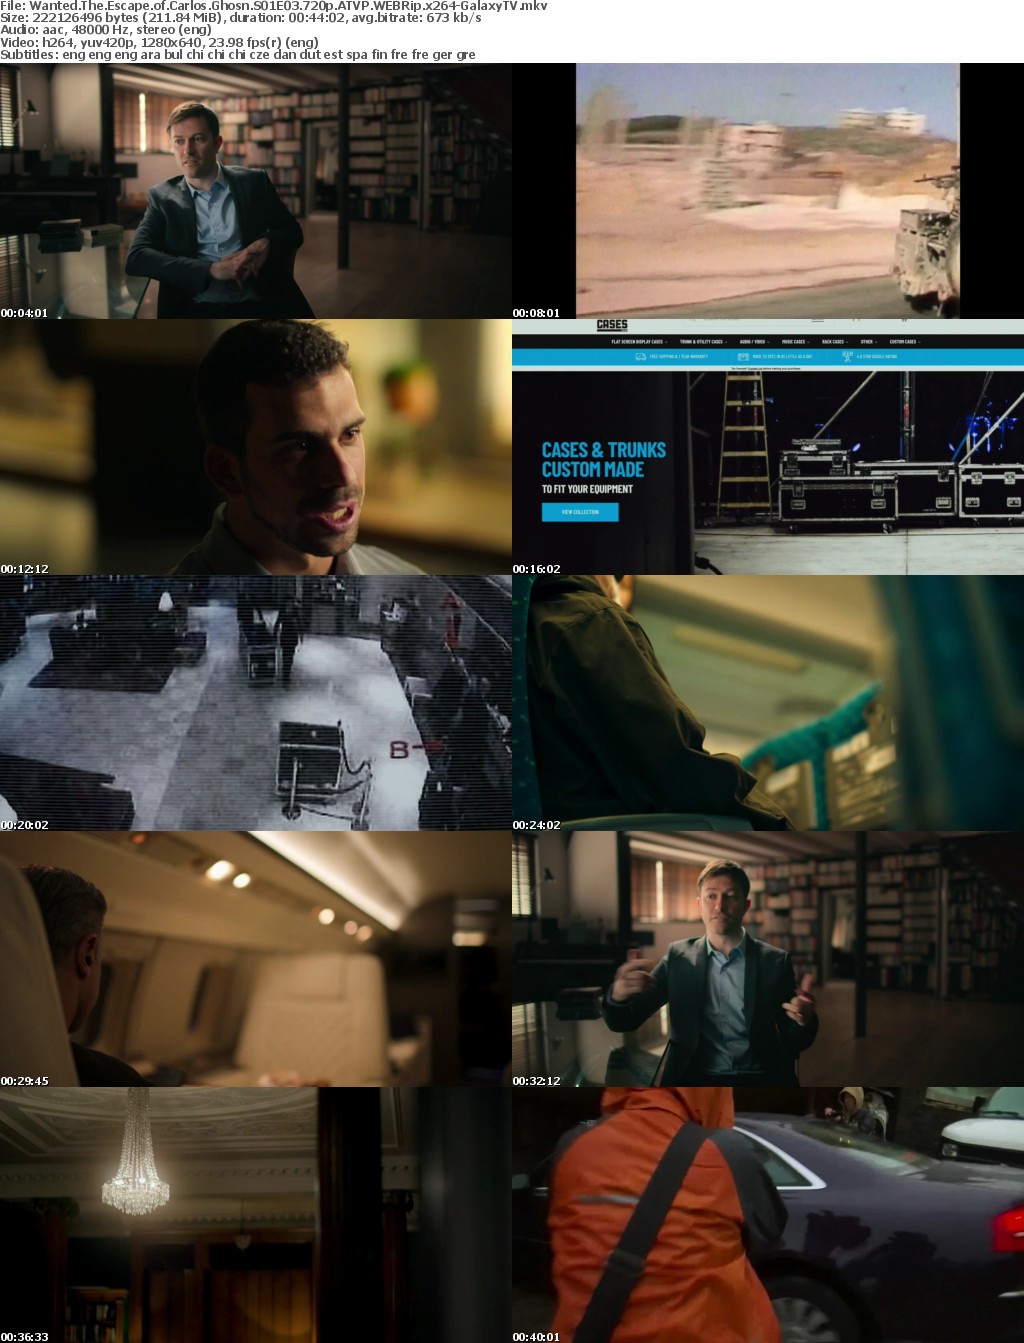 Wanted The Escape of Carlos Ghosn S01 COMPLETE 720p ATVP WEBRip x264-GalaxyTV